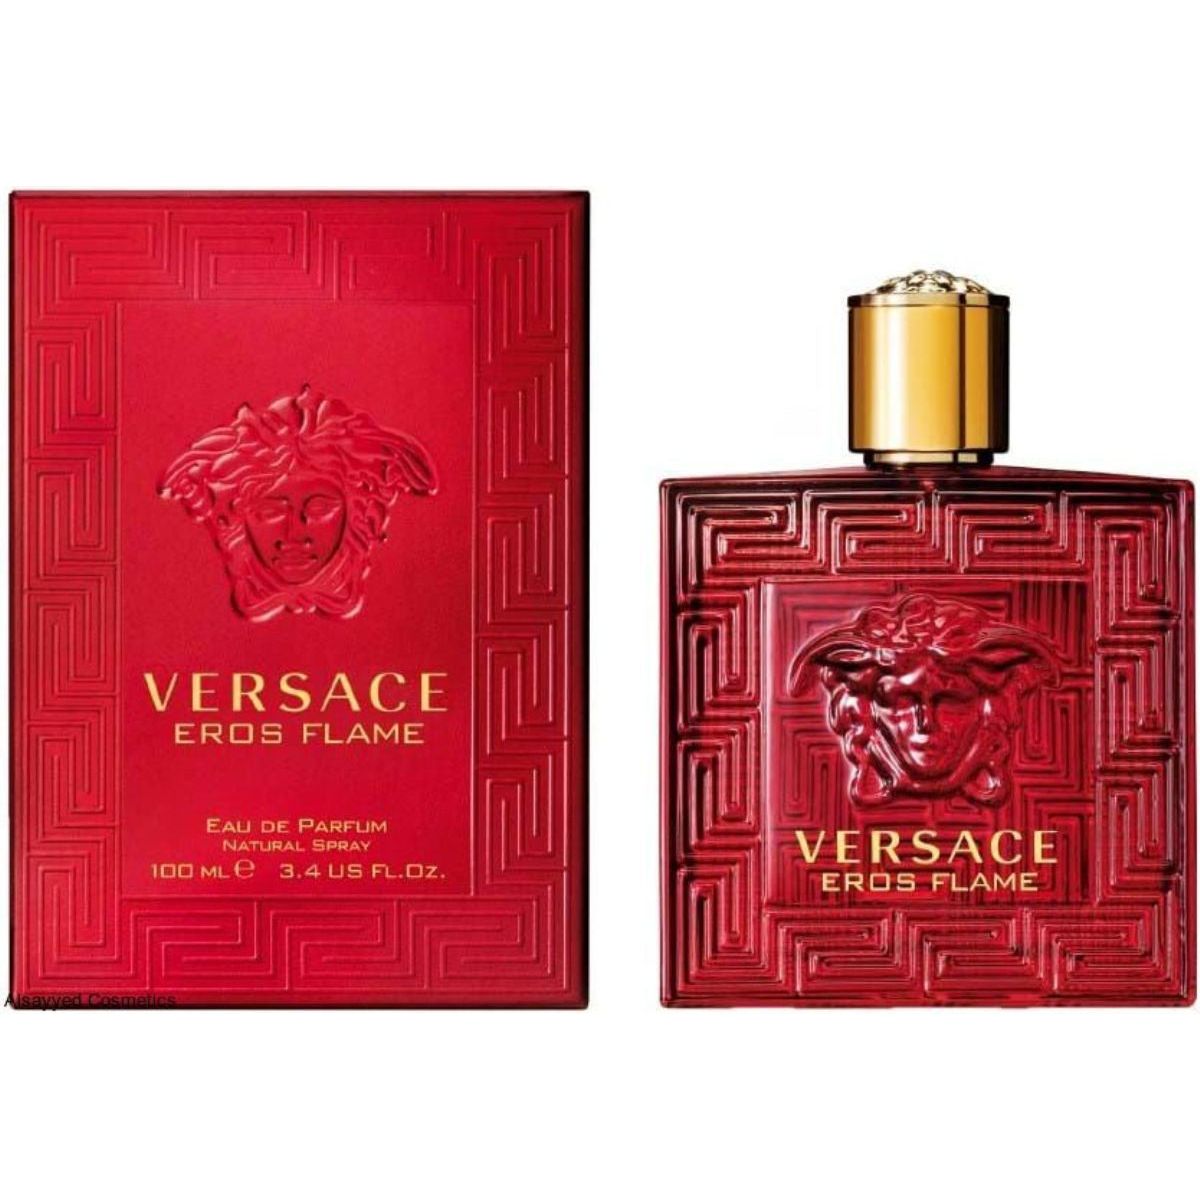 VERSACE EROS FLAME by Versace for men cologne EDP 3.3 / 3.4 oz New in